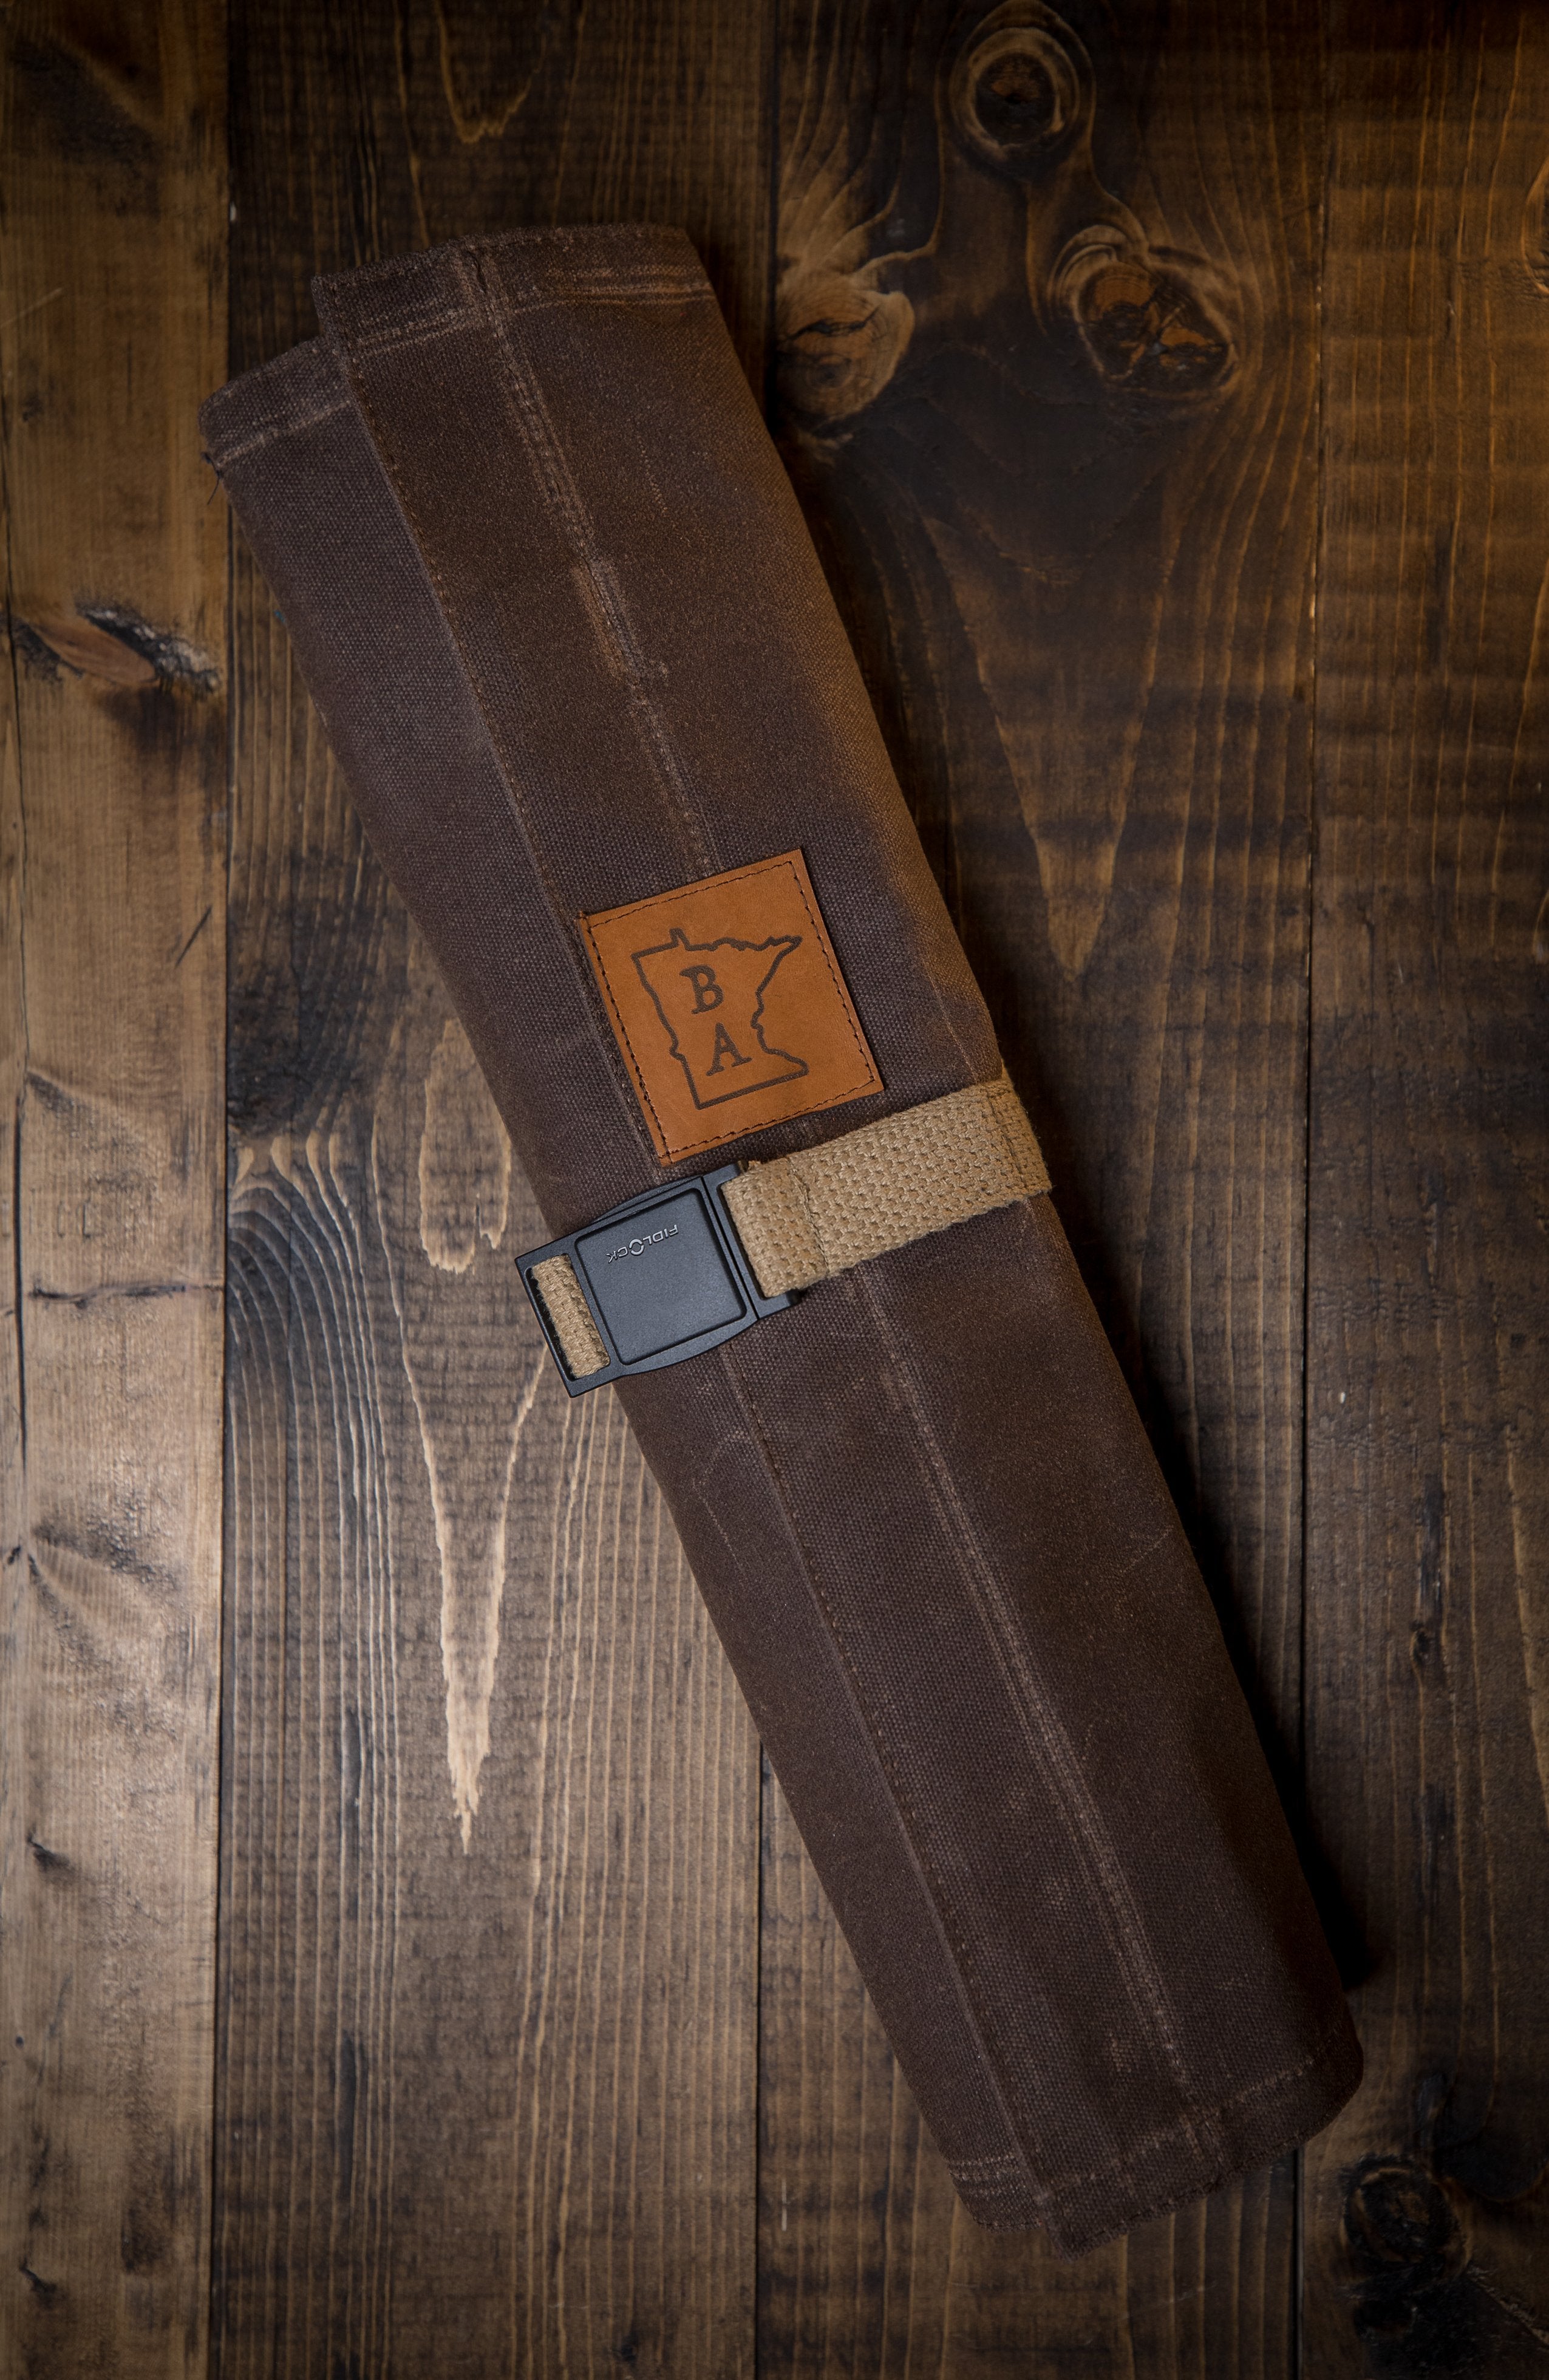 Long lasting brown cotton knife roll with tex-wax protection shown on a wooden surface. The Side Hustle knife roll was manufactured in Minnesota by Craftmade Aprons.